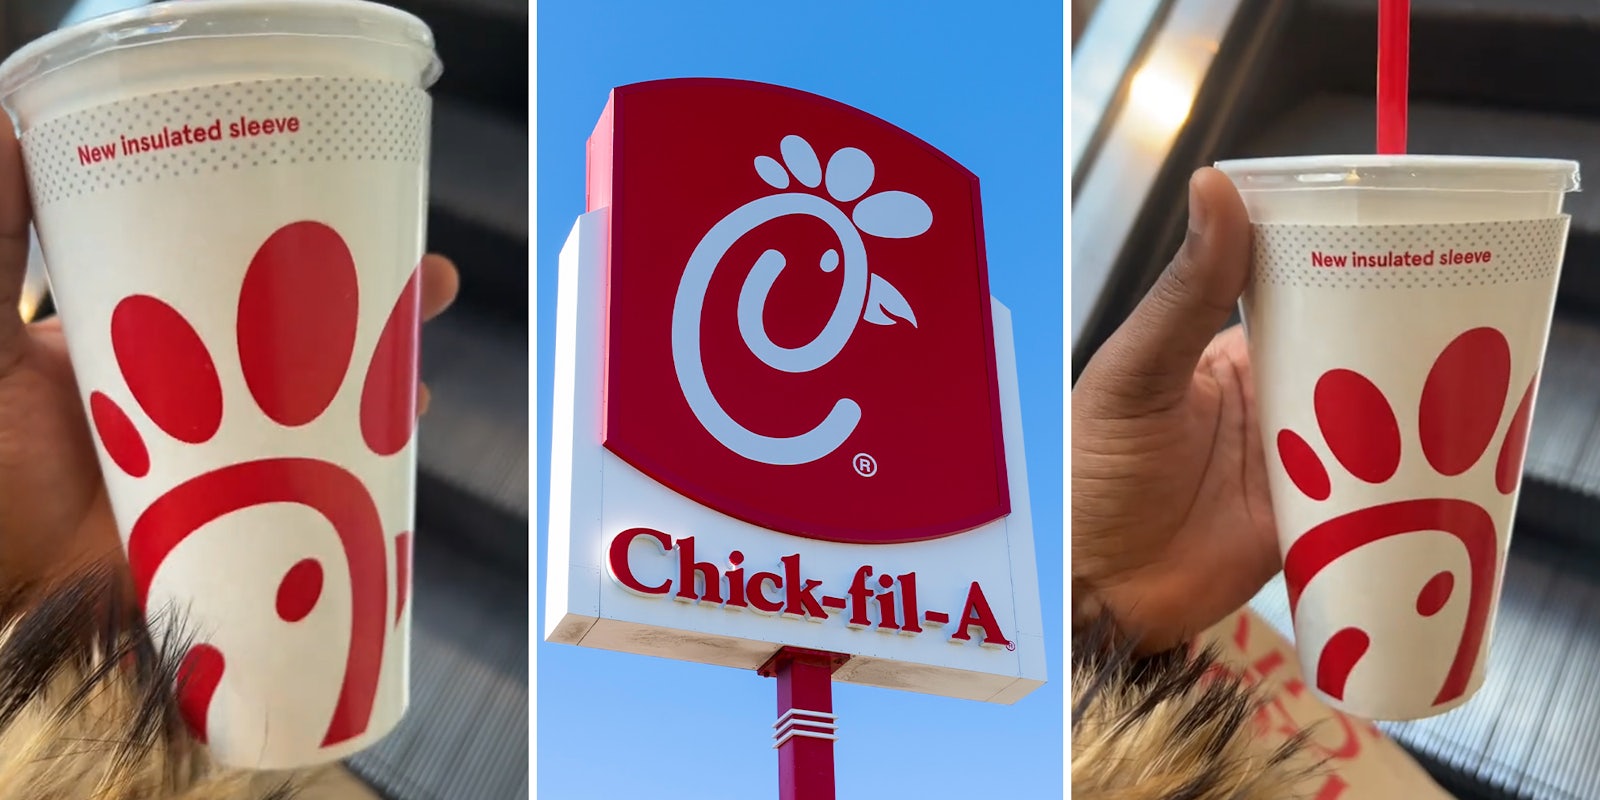 Chick-fil-A customer complains about new cup—says it’s driving costs up